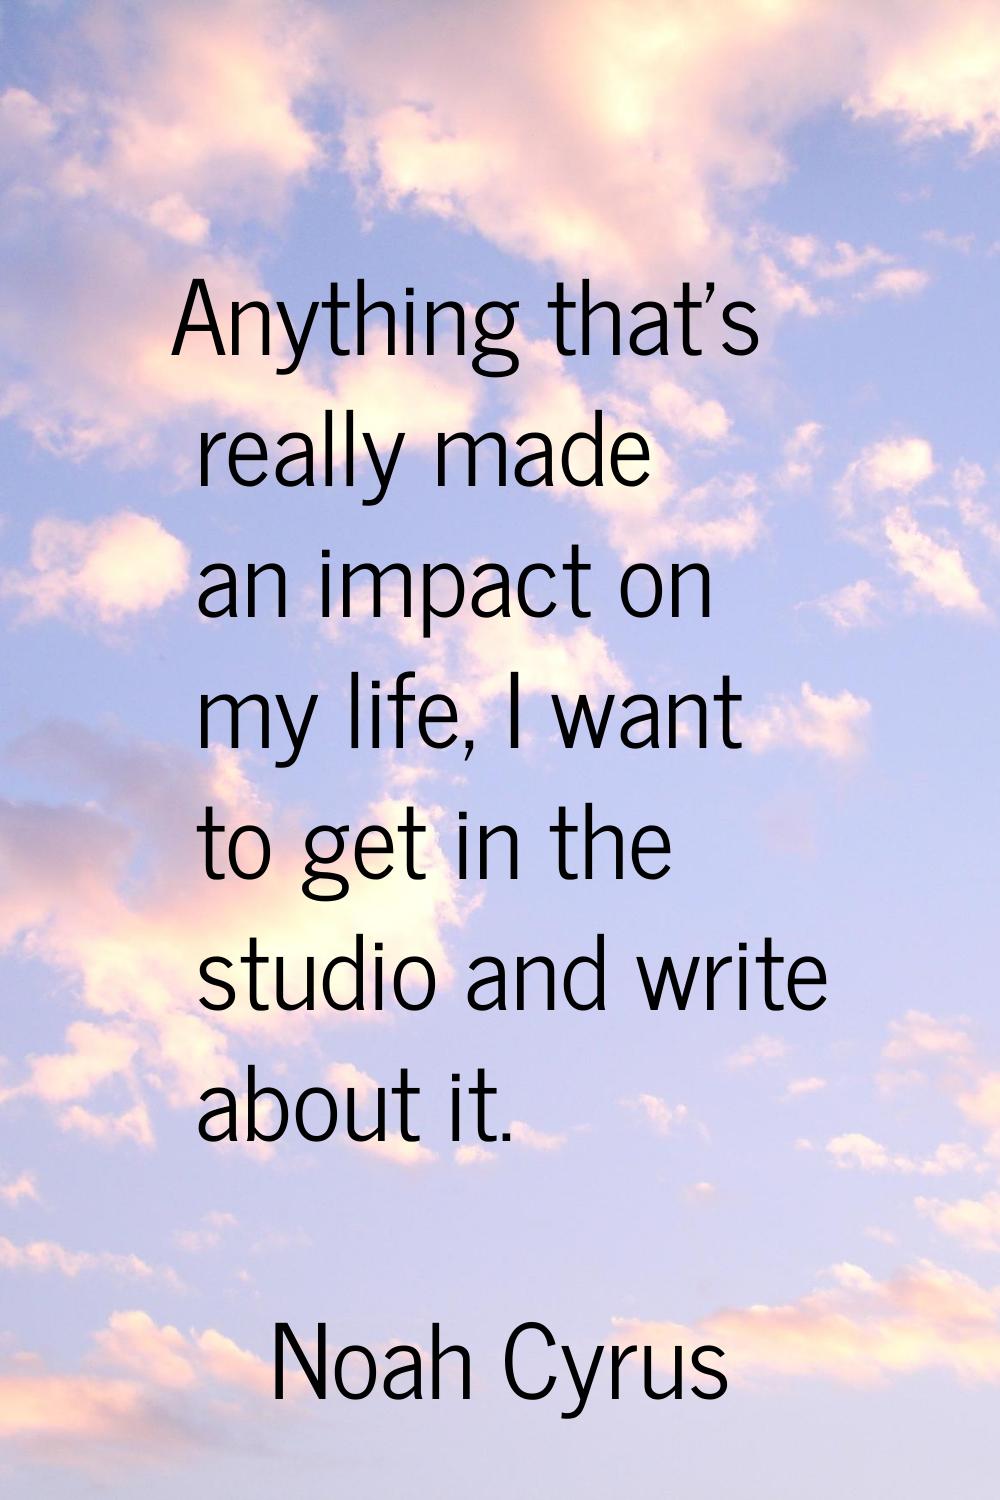 Anything that's really made an impact on my life, I want to get in the studio and write about it.